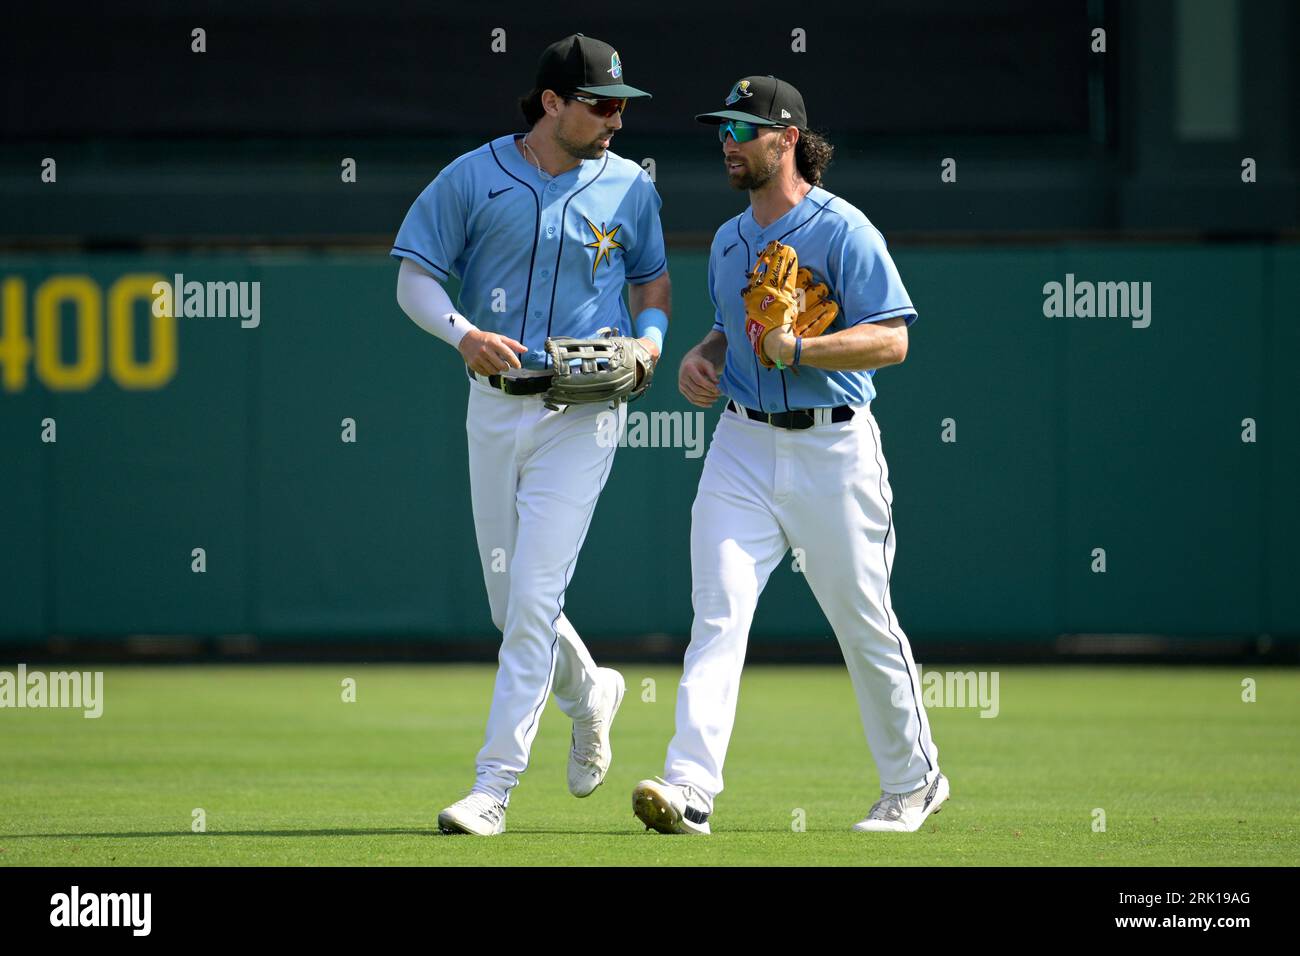 Tampa Bay Rays outfielders Jordan Qsar, left, and Charlie Culberson chat  after Culberson caught a fly ball during the sixth inning of a spring  training baseball game against the New York Yankees